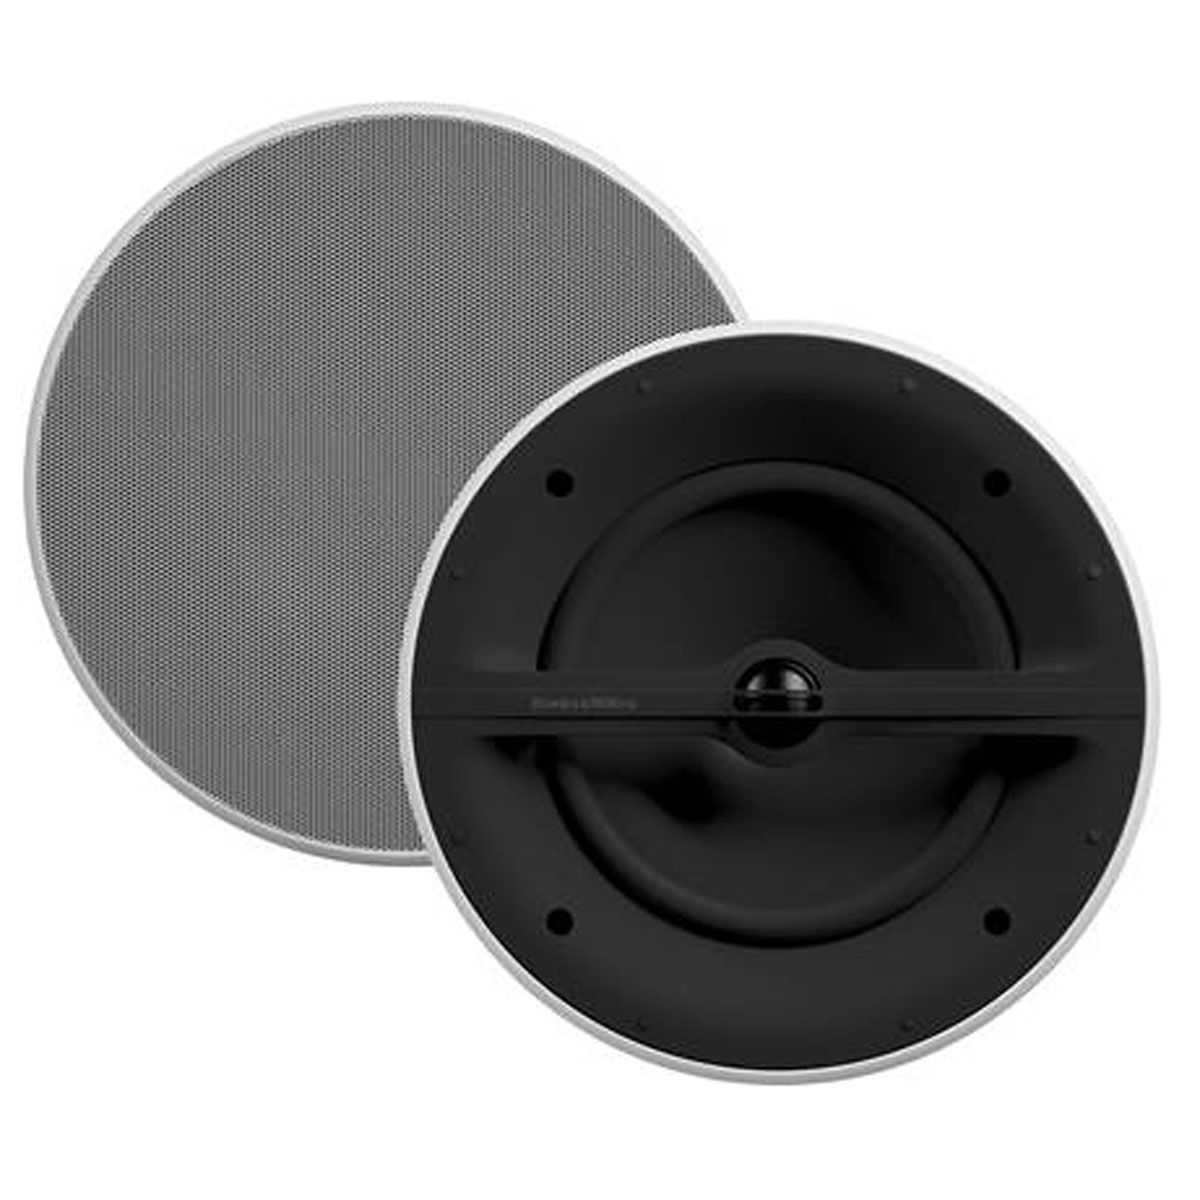 Bowers & Wilkins Flexible Series CCM382 In-ceiling speakers with and without grill